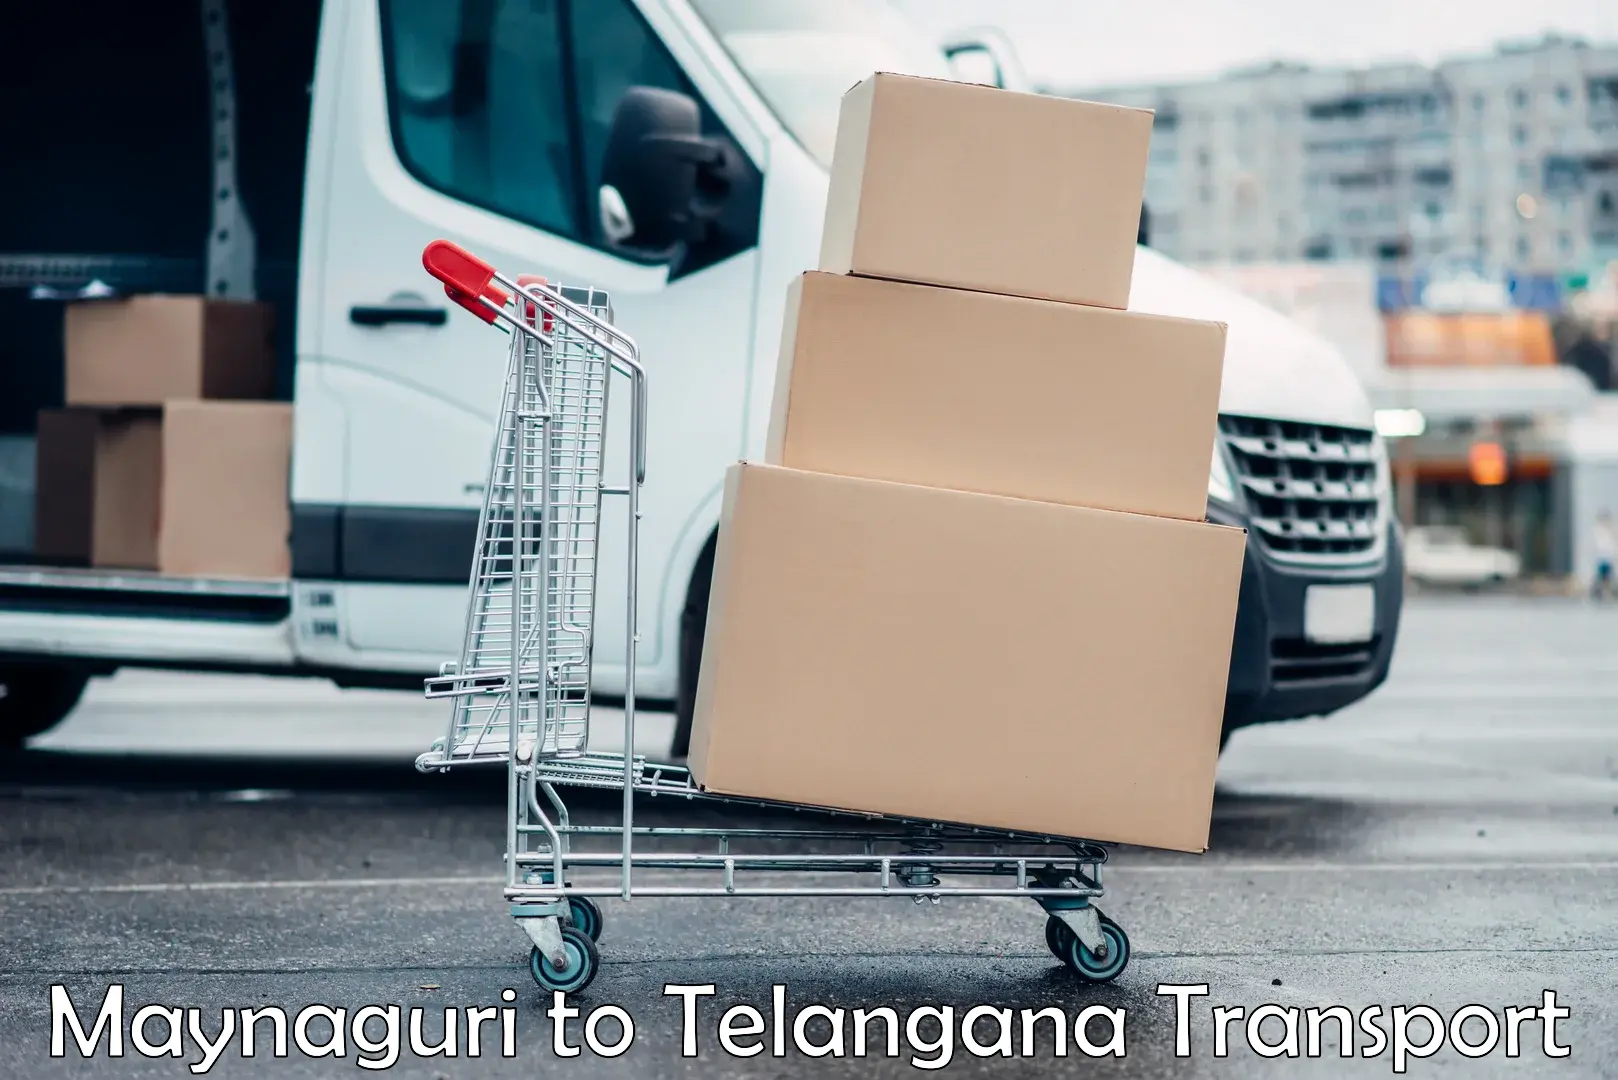 Package delivery services Maynaguri to Netrang